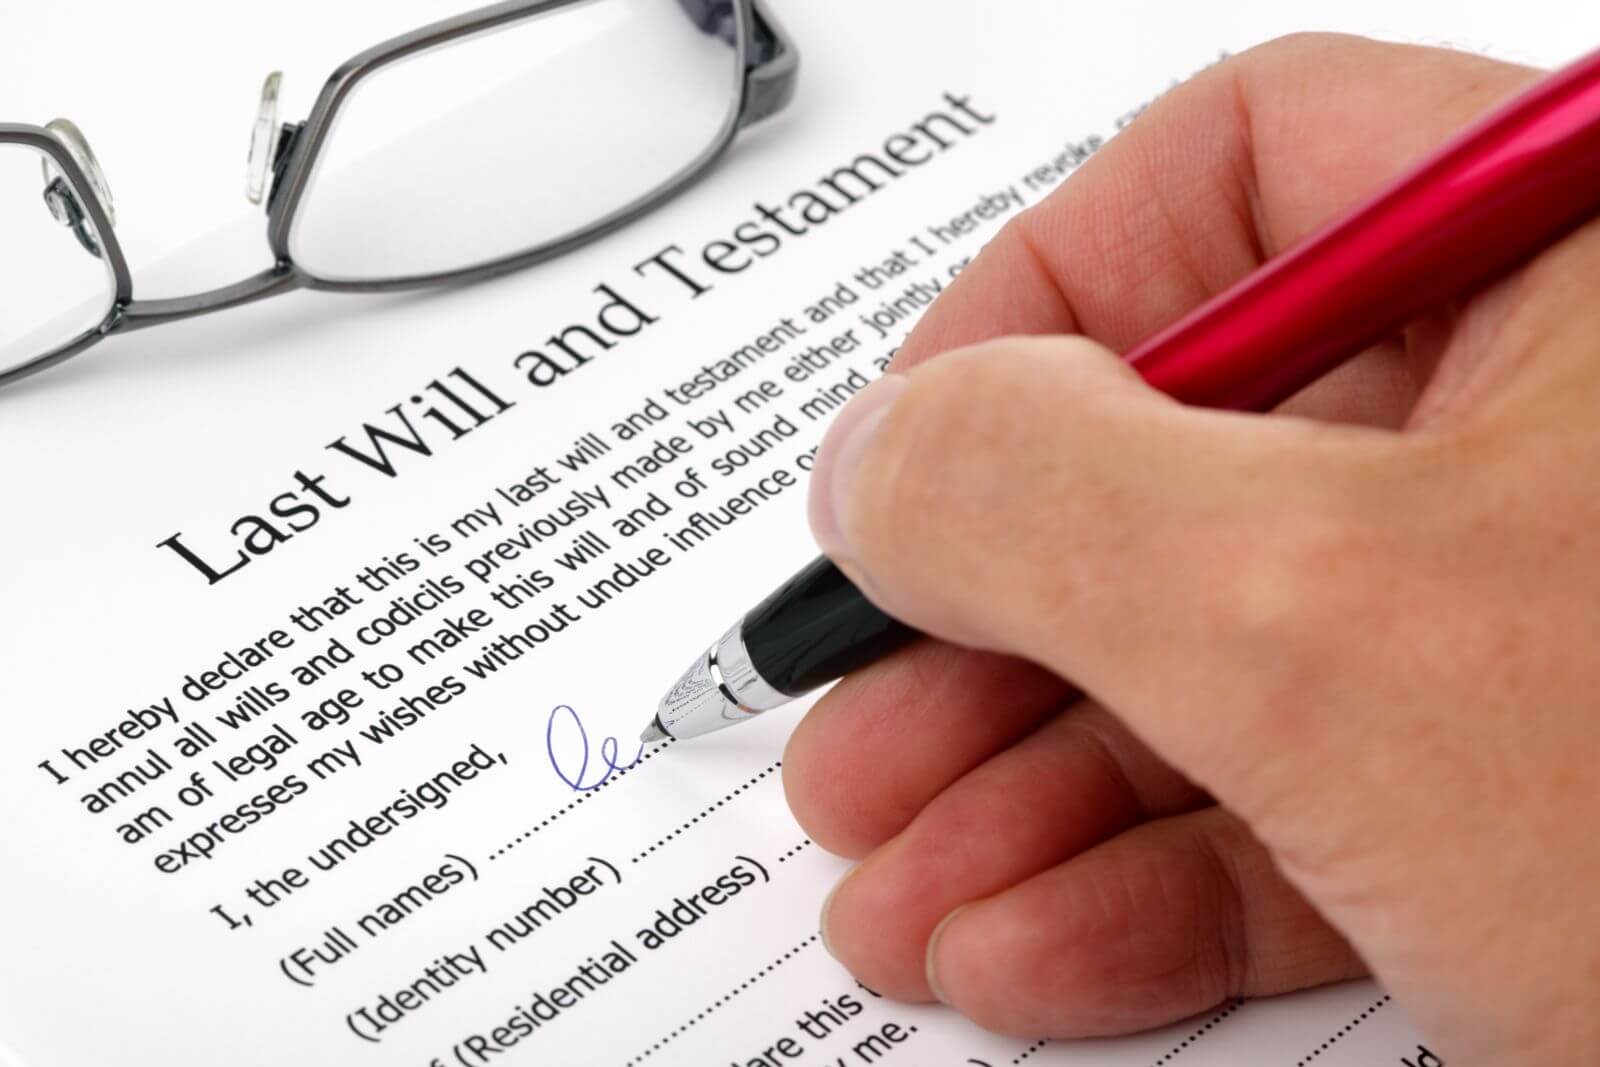 Making a will during the COVID-24 pandemic - homecare.co.uk advice